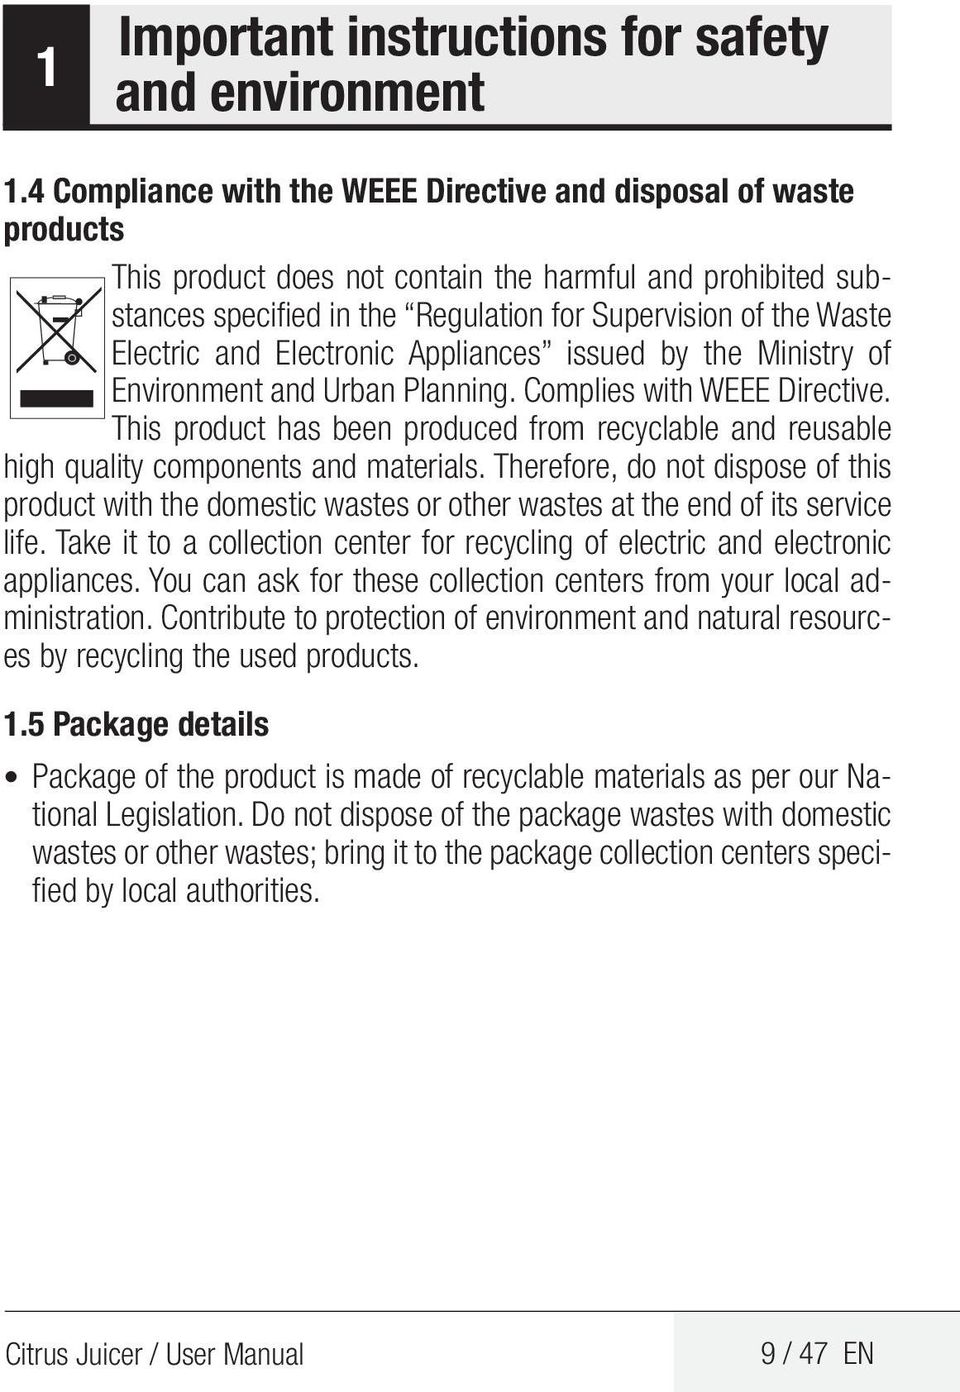 Electric and Electronic Appliances issued by the Ministry of Environment and Urban Planning. Complies with WEEE Directive.